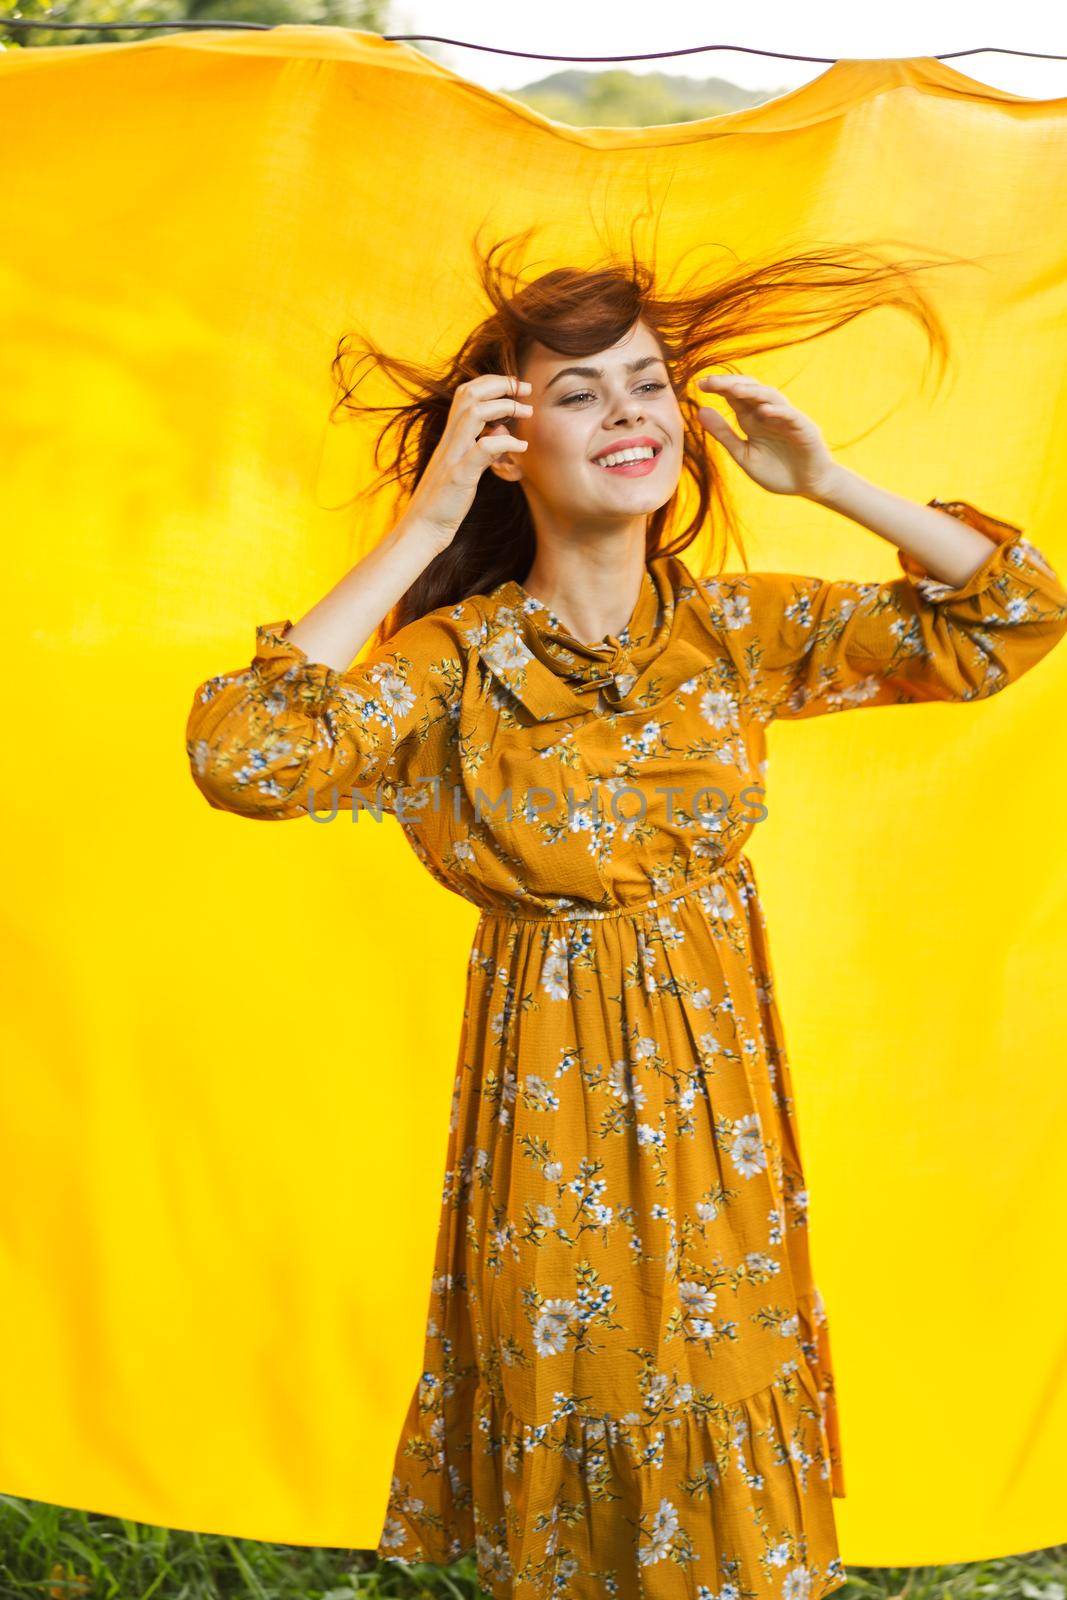 attractive woman outdoors hairstyle summer posing yellow background. High quality photo